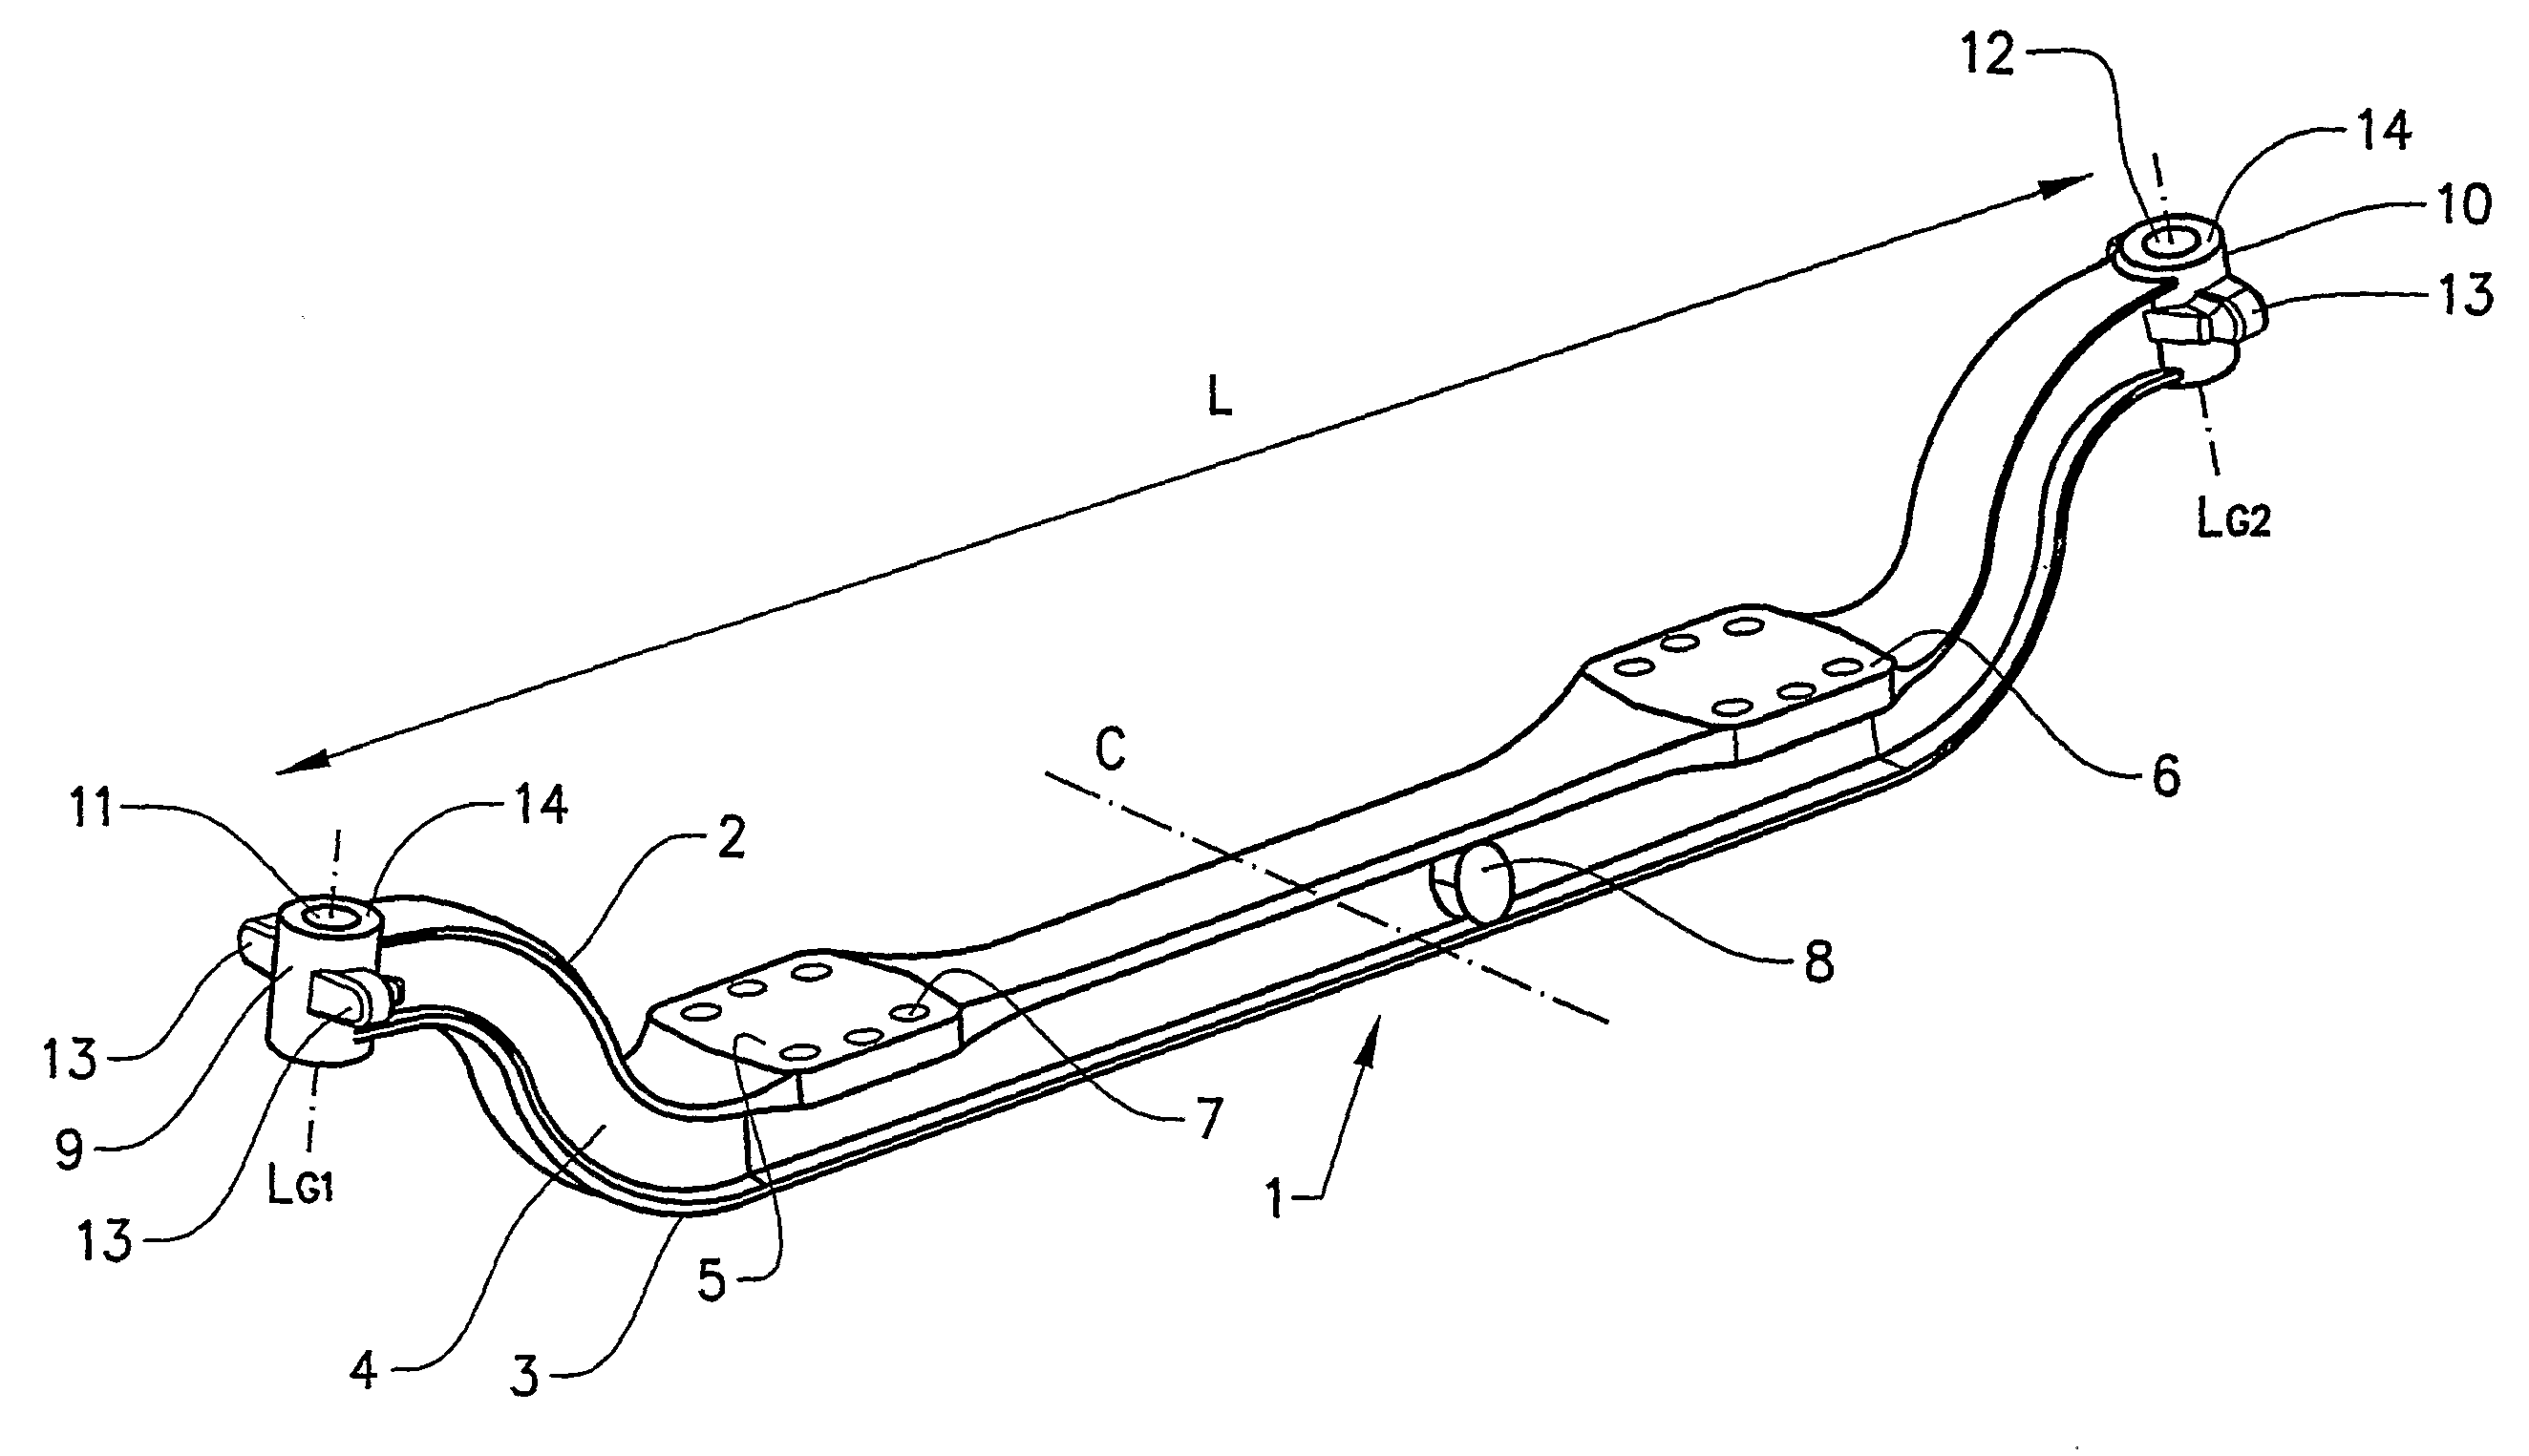 Blank For an Axle Beam, Wheel Suspension Comprising an Axle and a Method For Manufacturing an Axle